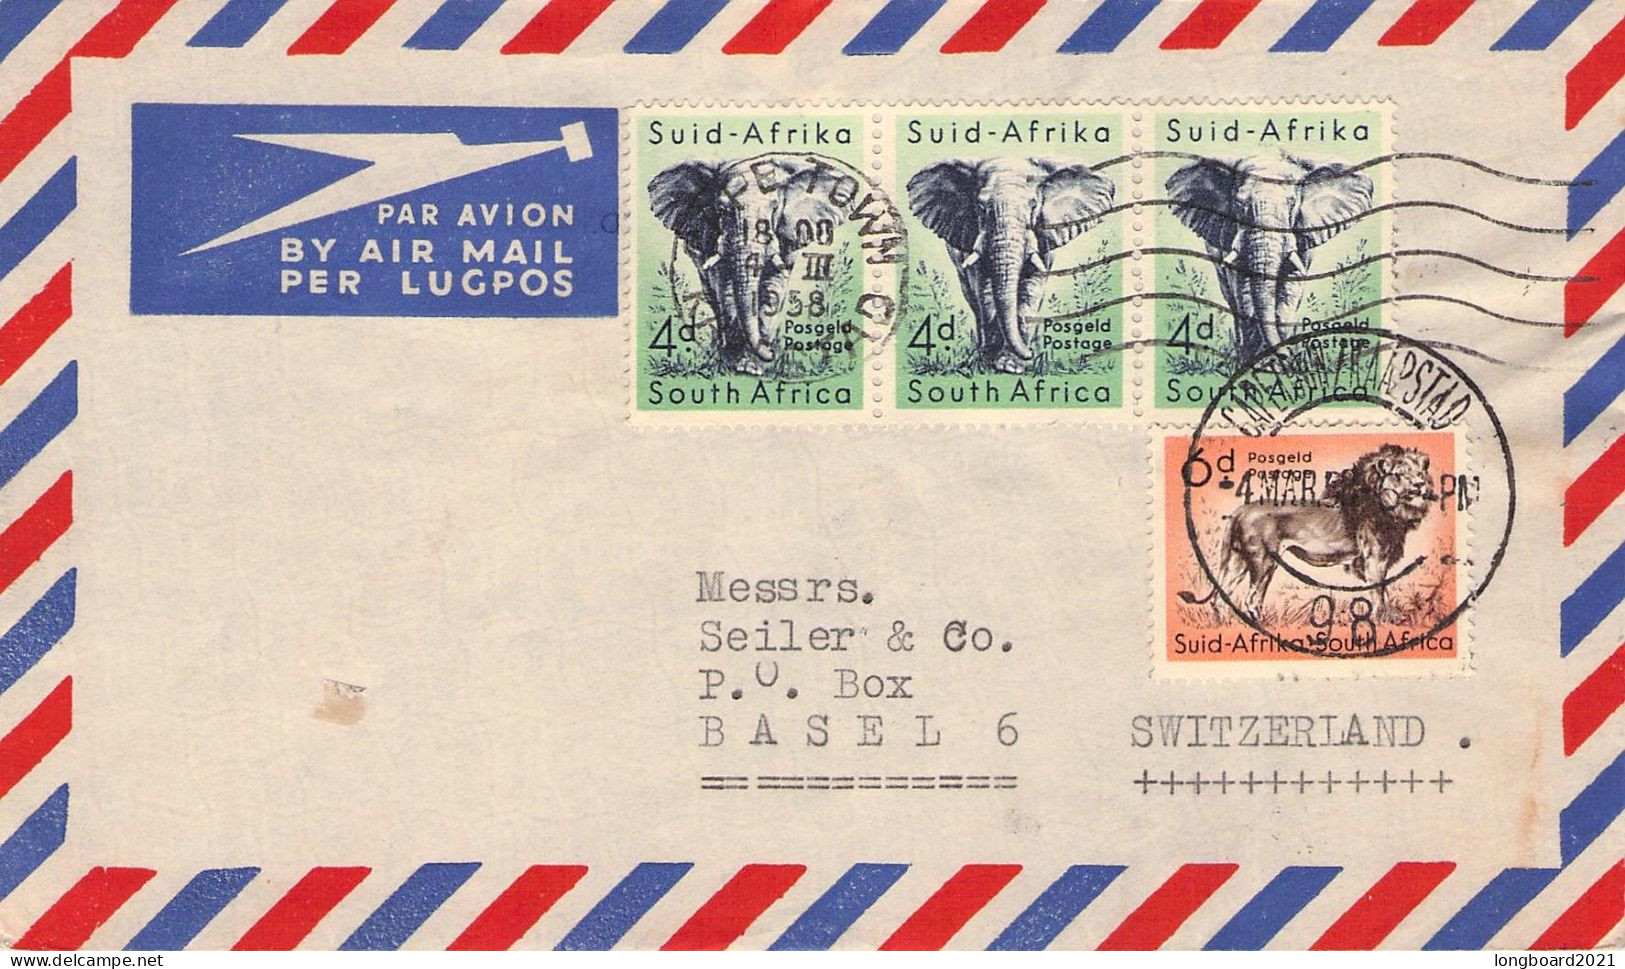 SOUTH AFRICA - MAIL 1958 CAPE TOWN - BASEL/CH / 5246 - Airmail